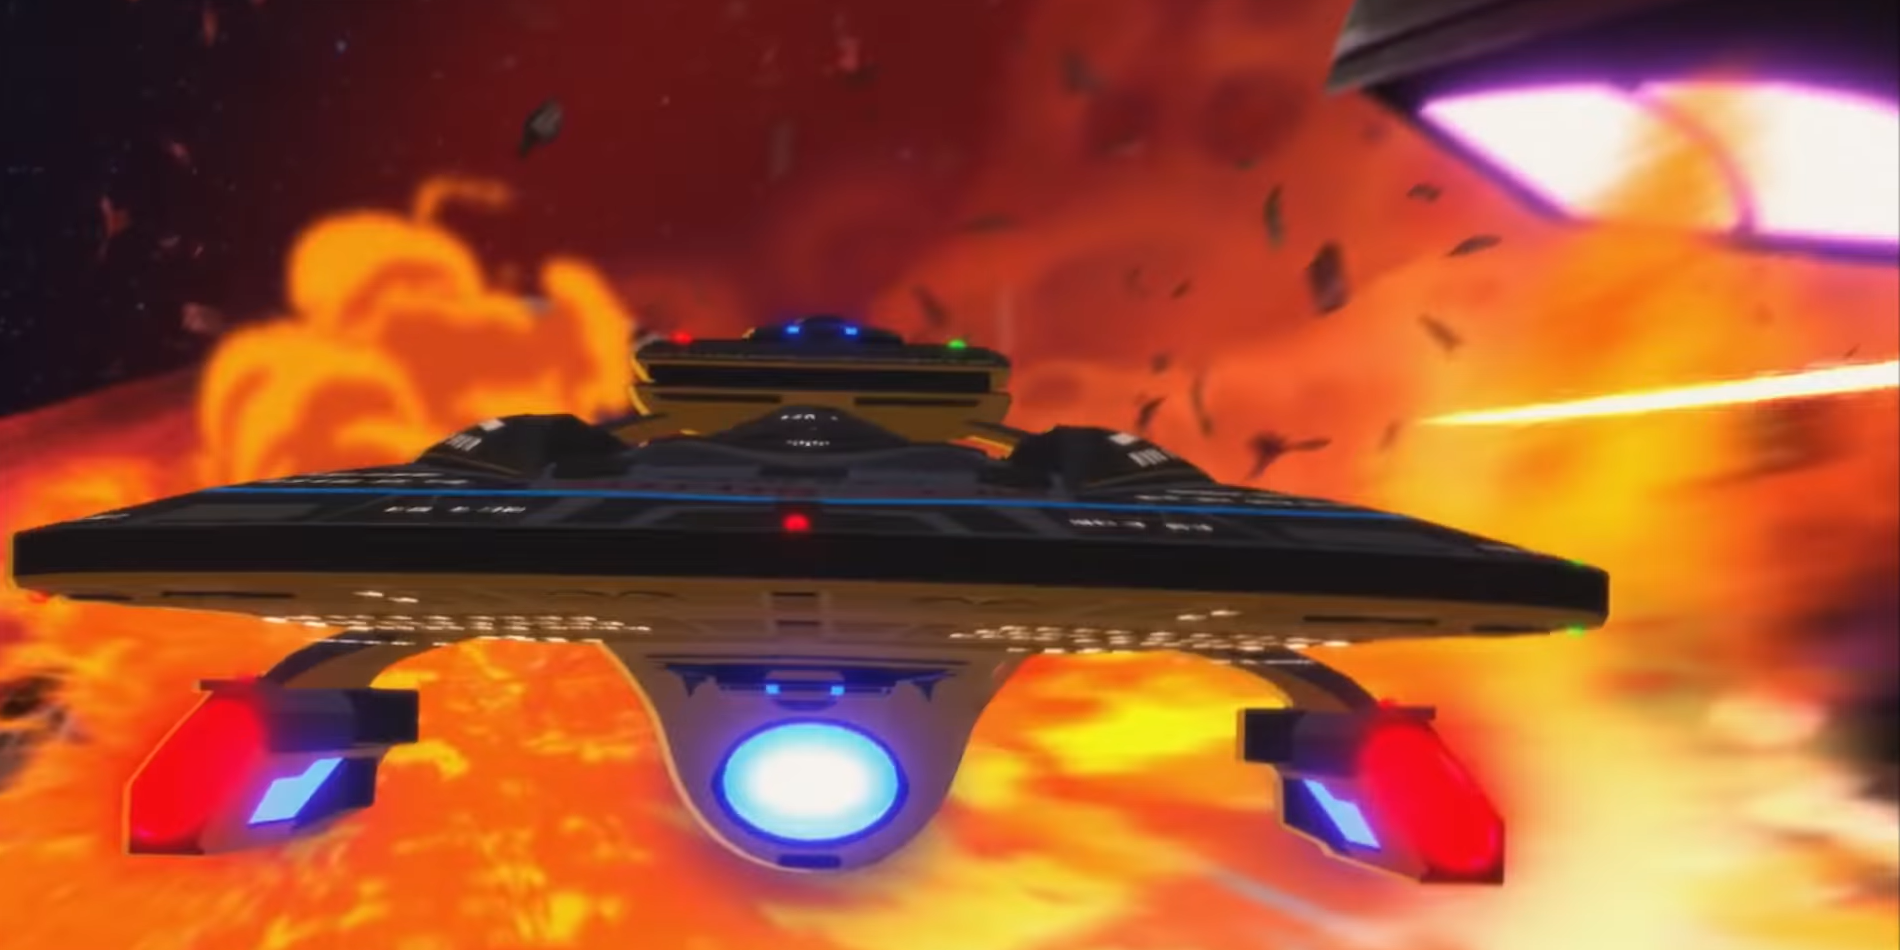 The USS Titan comes to the rescue in Star Trek: Lower Decks.